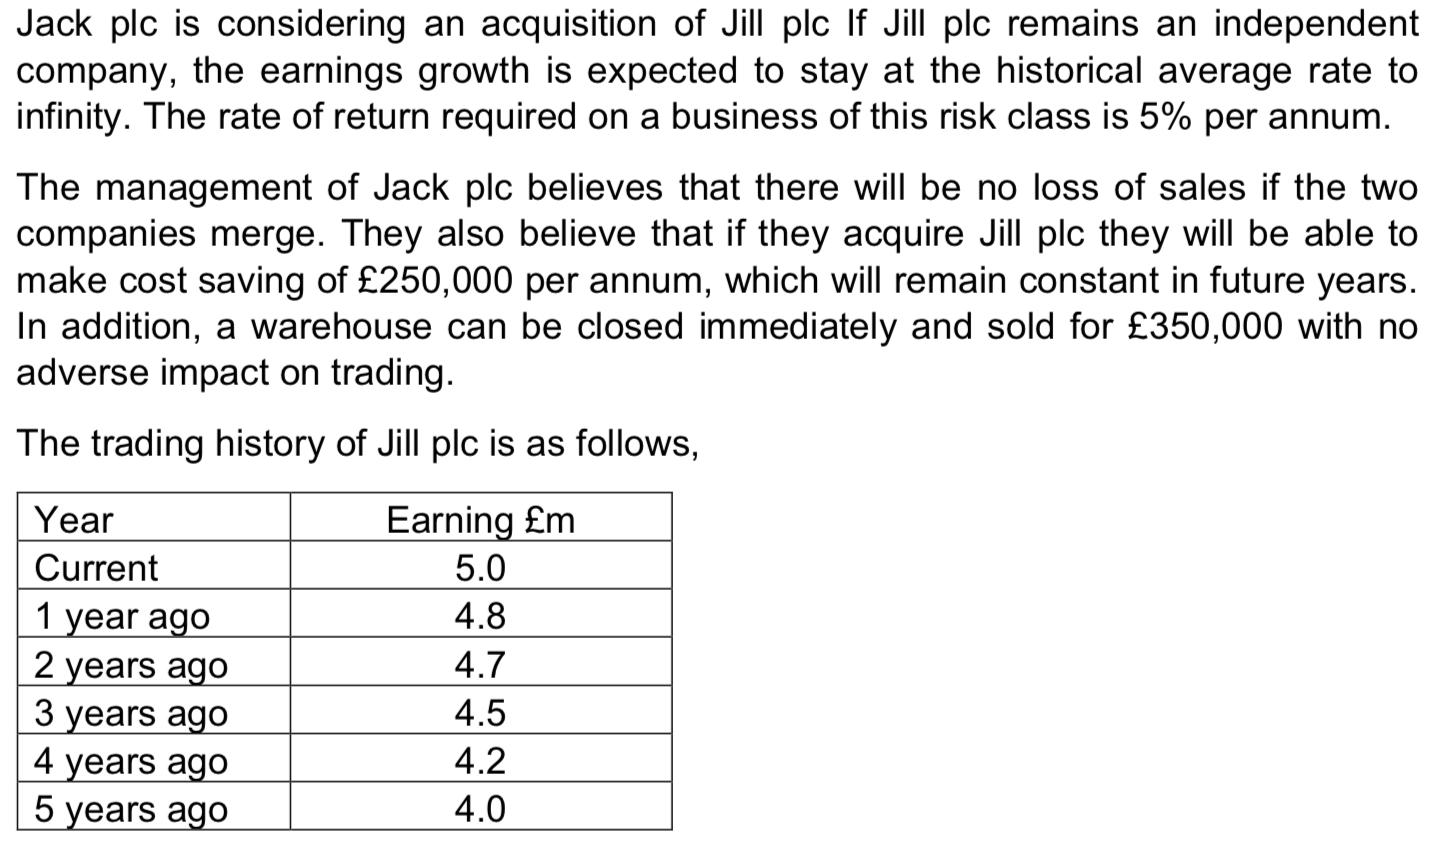 Jack plc is considering an acquisition of Jill plc If Jill plc remains an independent company, the earnings